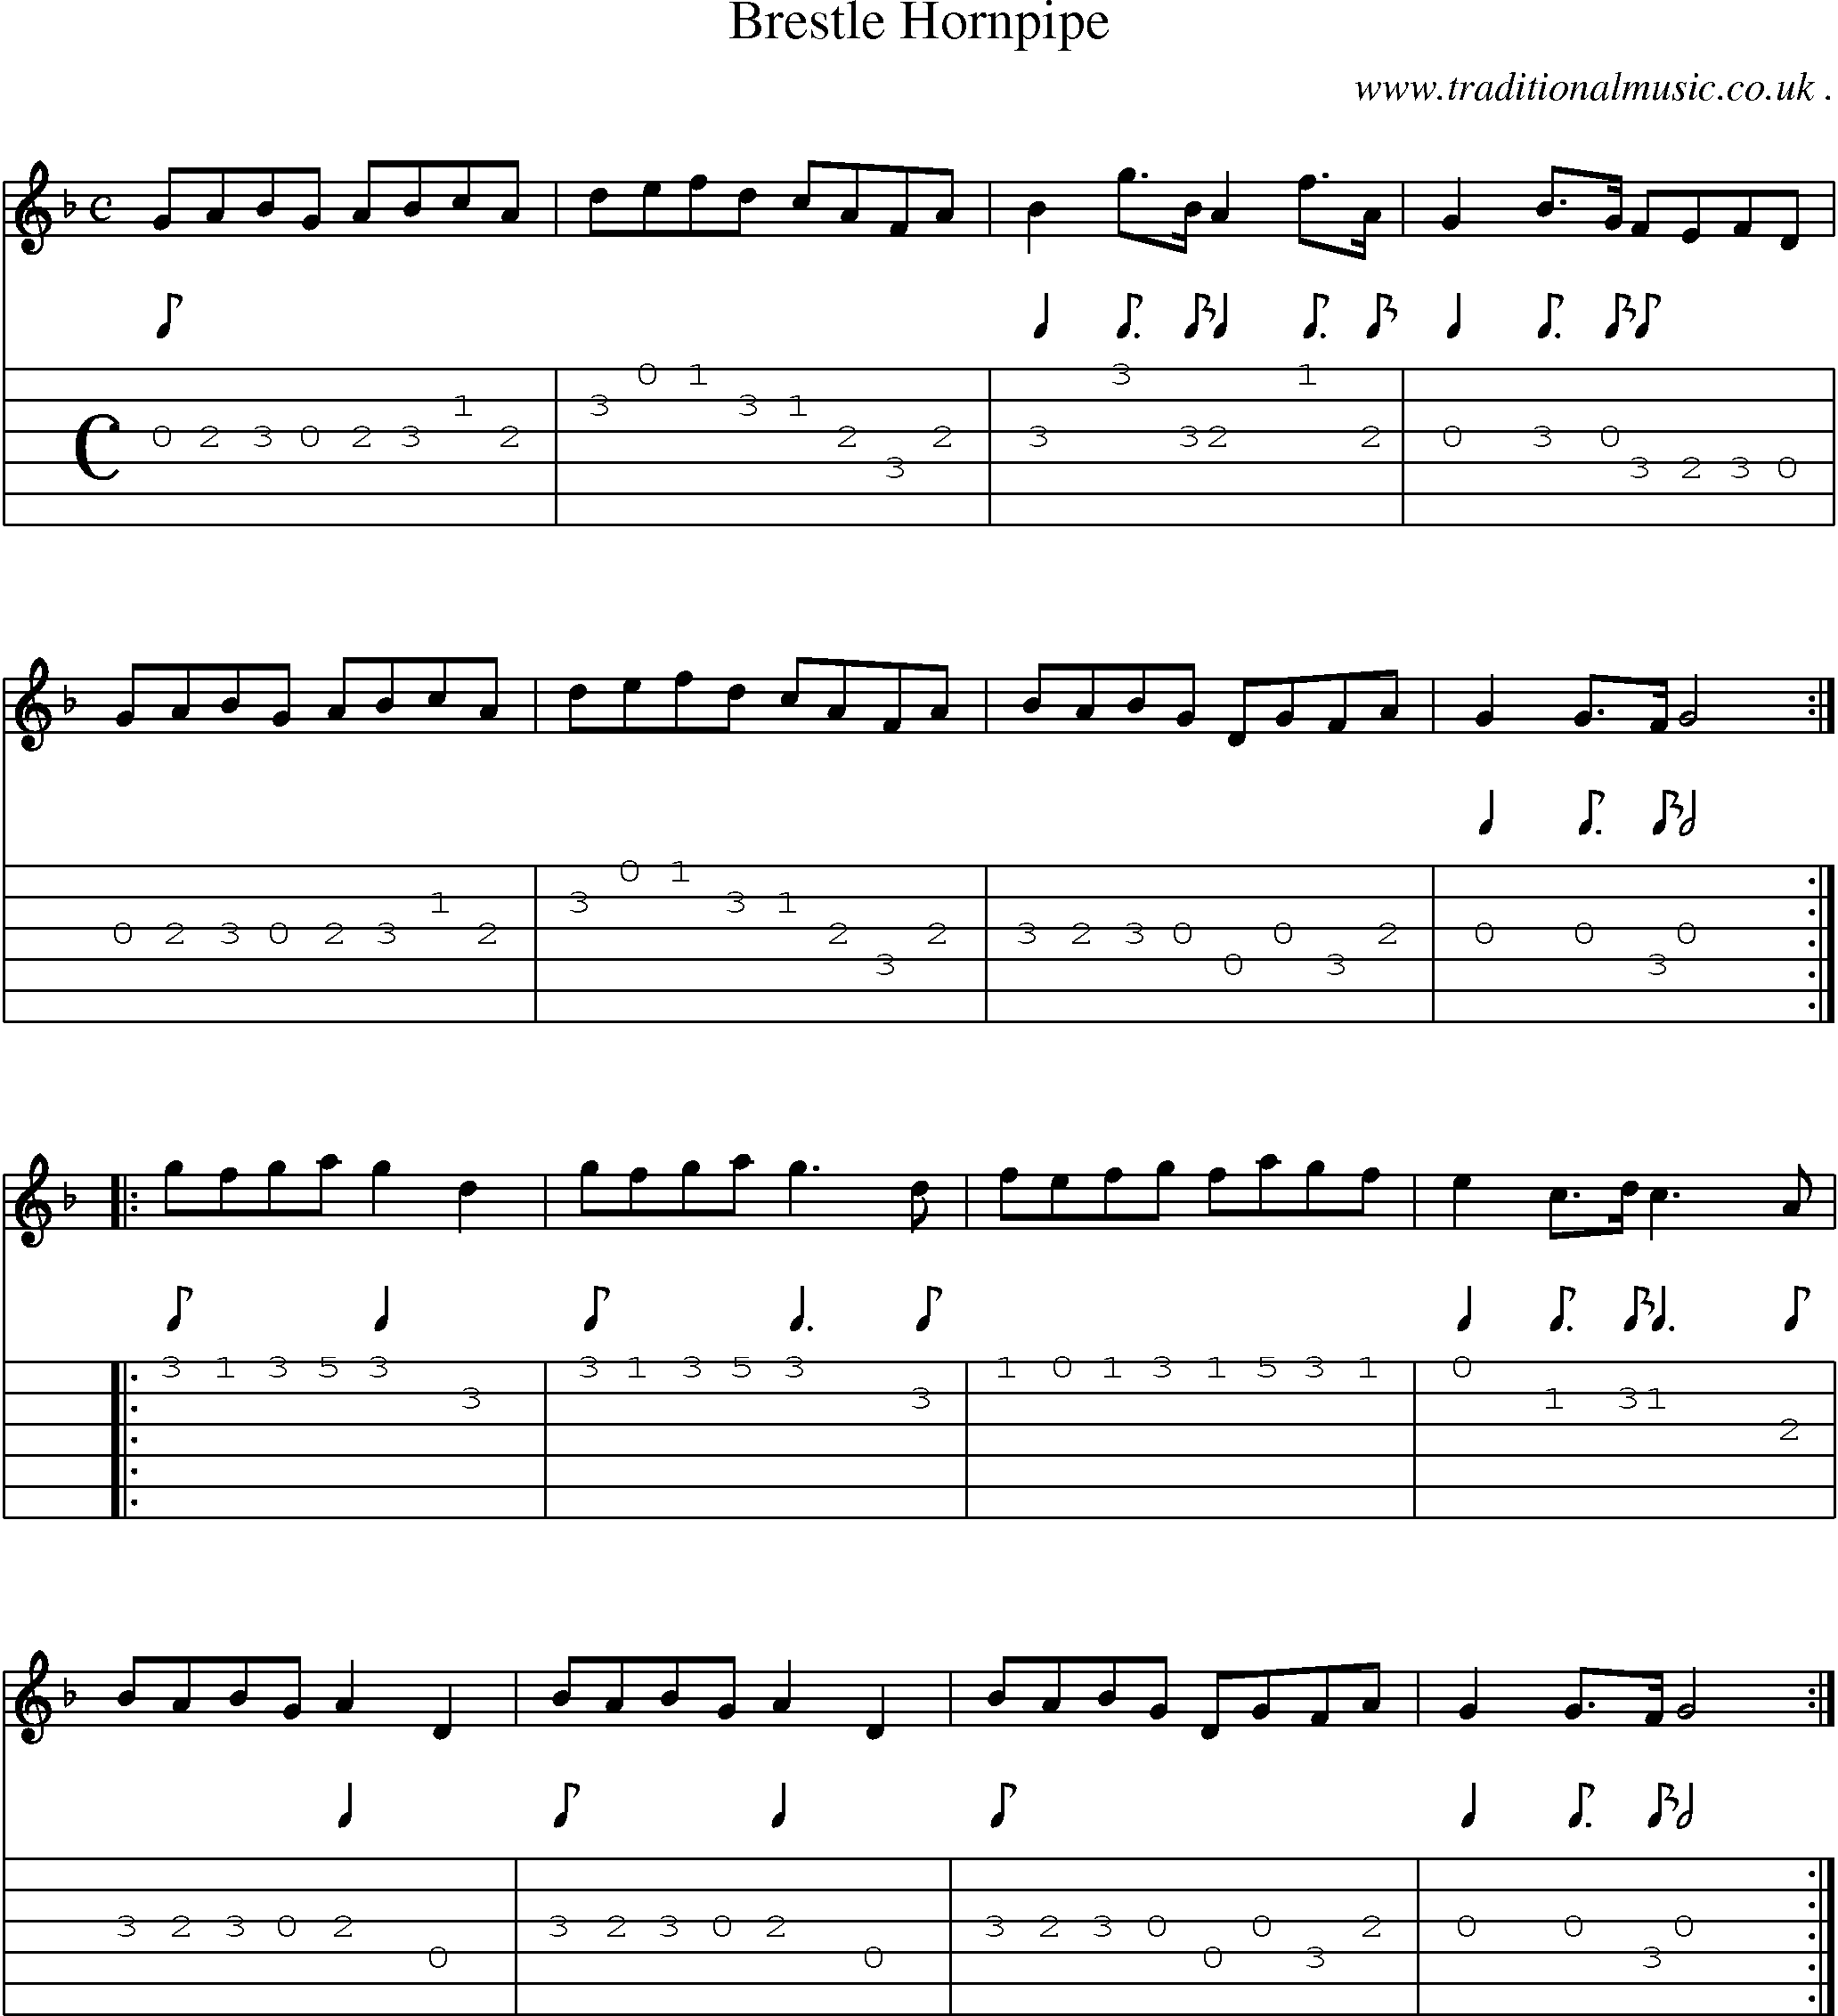 Sheet-Music and Guitar Tabs for Brestle Hornpipe